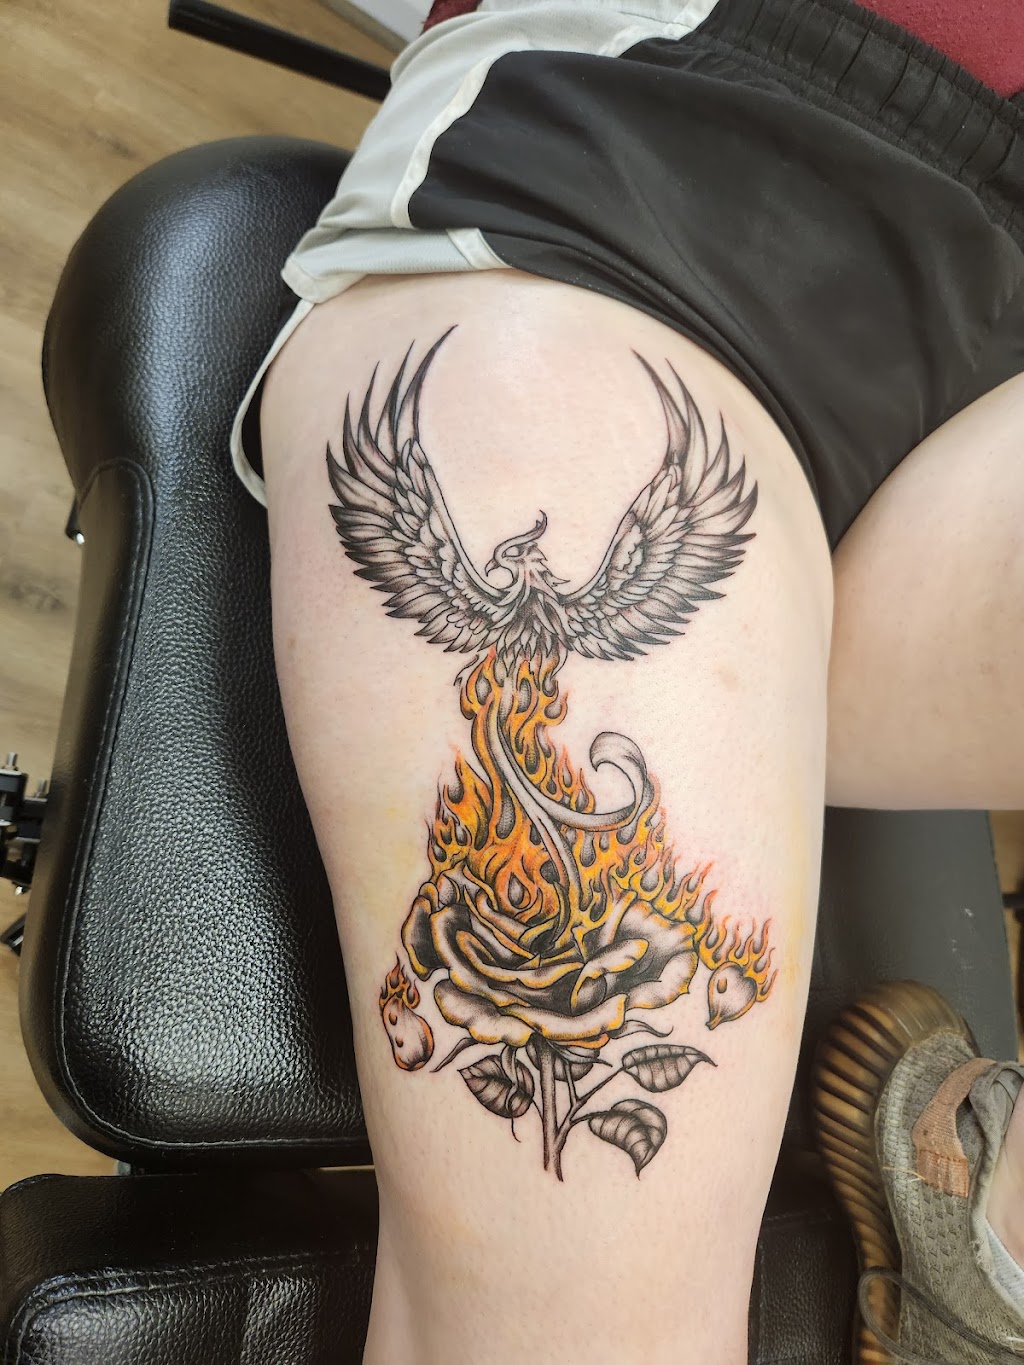 The Ravens Nest Tattoo and Art Emporium | 1591 Heart Lake Rd suite 2, Jermyn, PA 18433 | Phone: (570) 396-1897